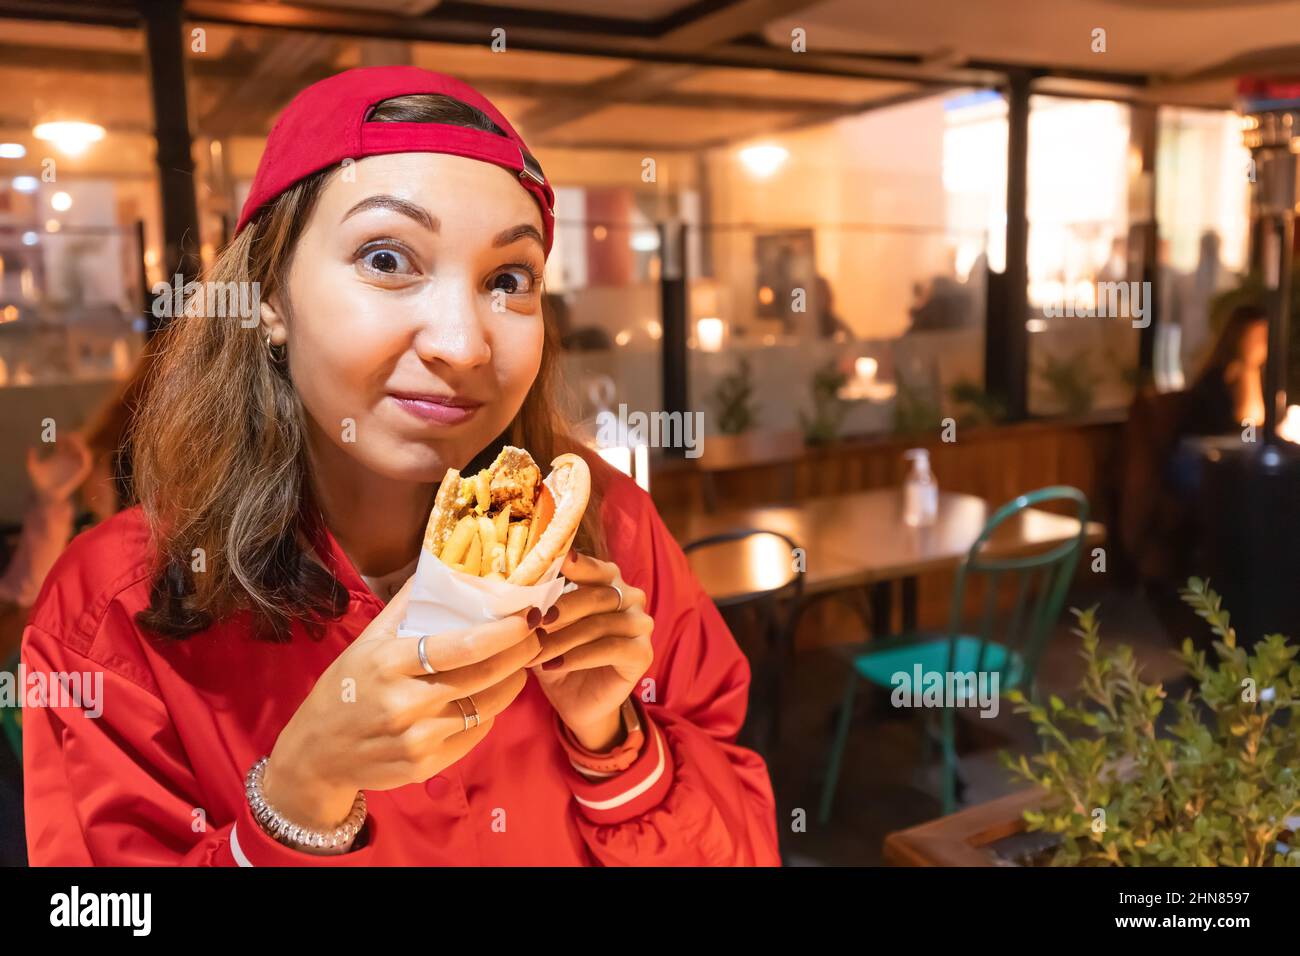 Happy woman eating gyros or a hot dog in a fast food restaurant Stock Photo